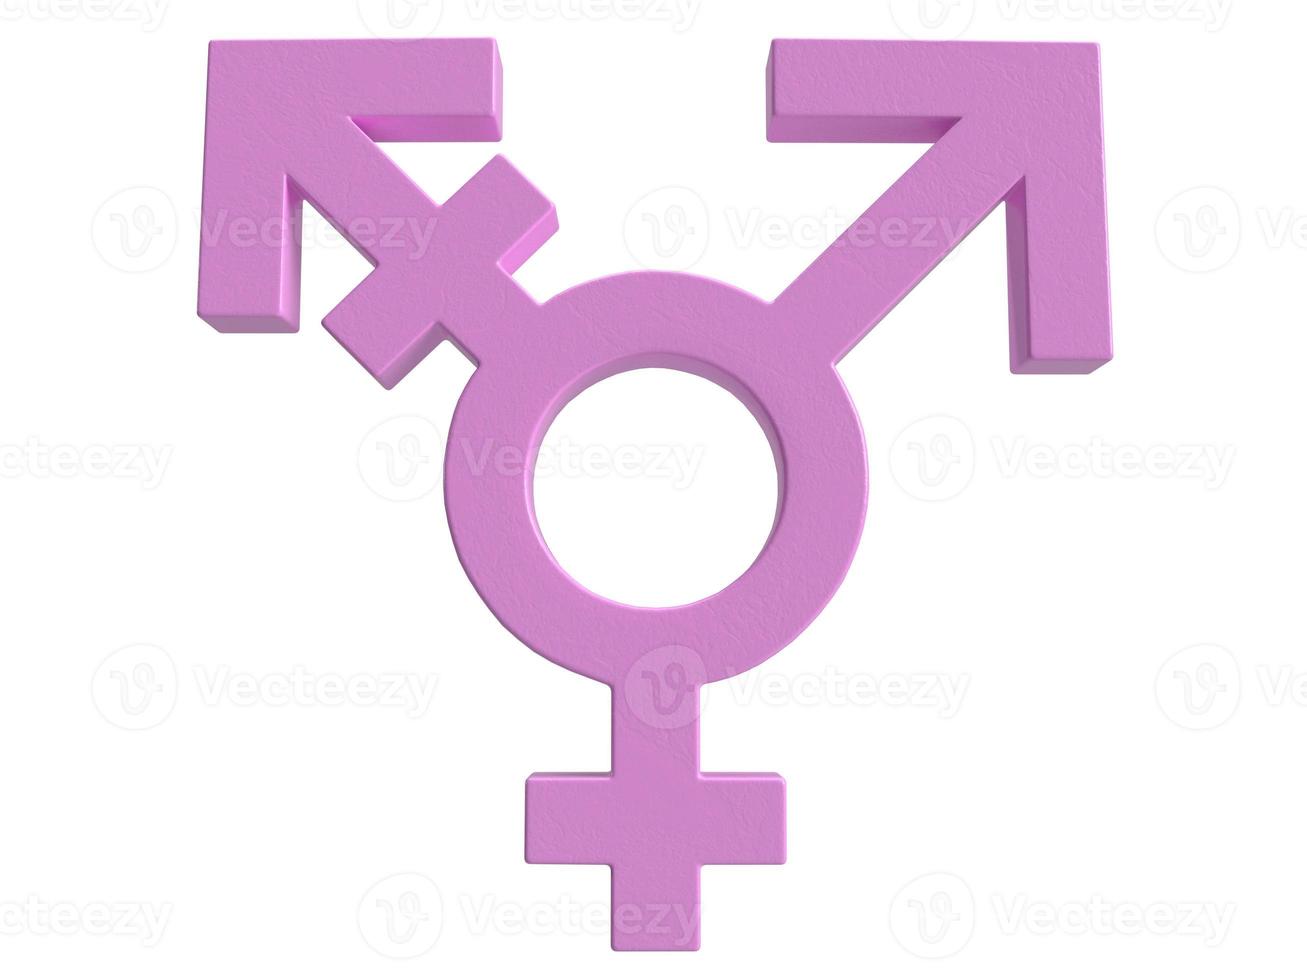 Symbol sex person lesbian gay homosexual love woman man female male pride gender human right pride bisexual social rainbow transgender equality freedom diversity icon relationship together lgbtq photo